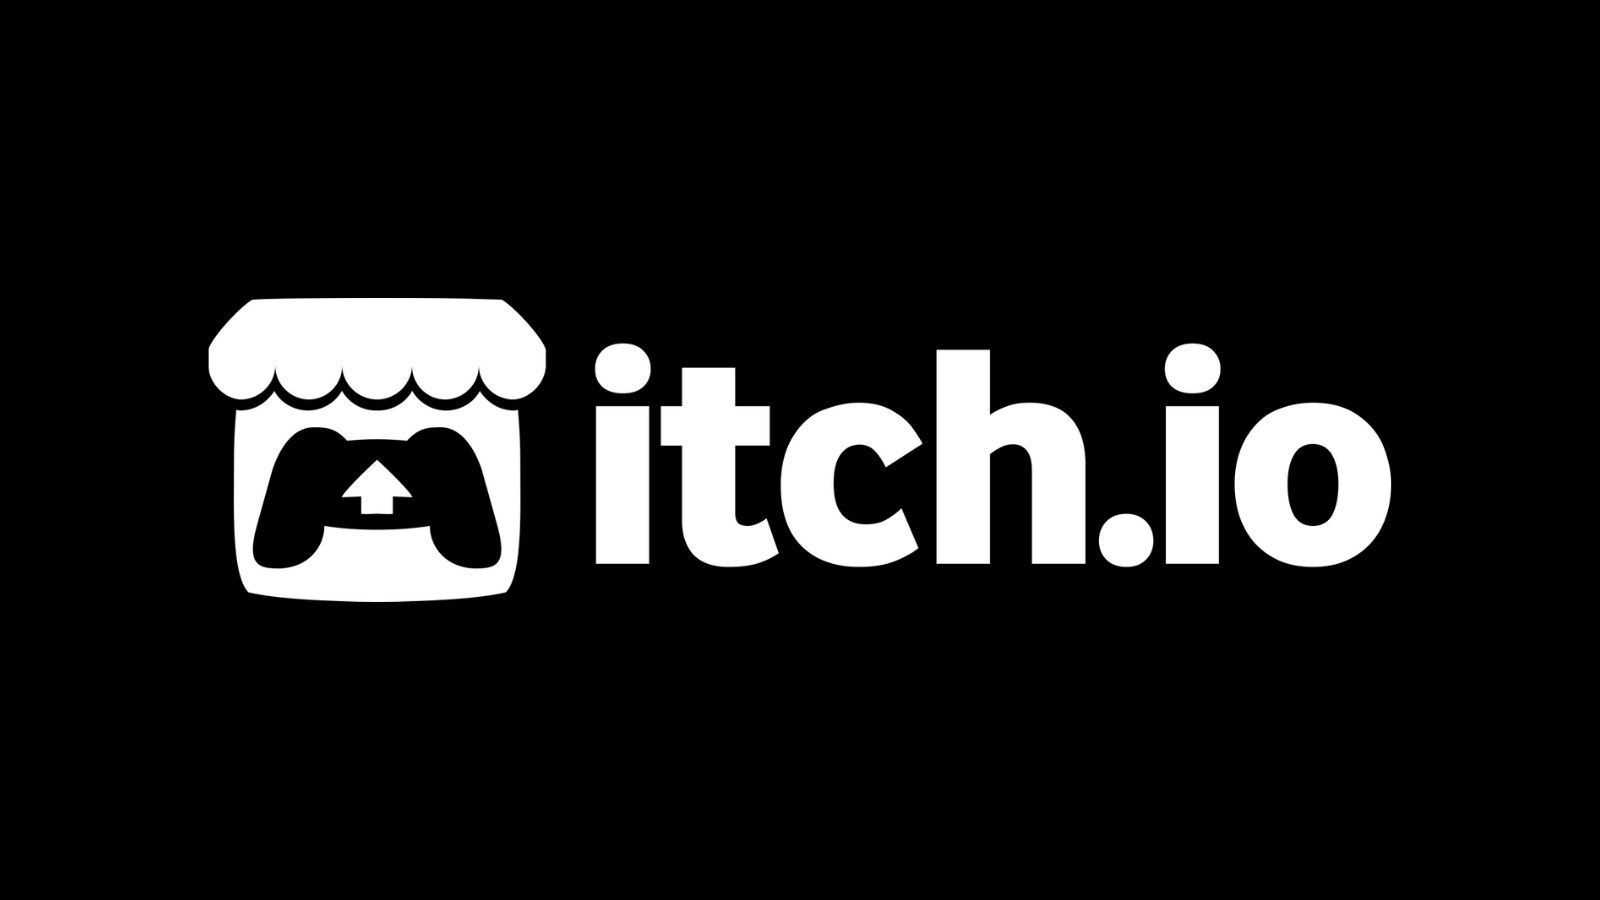 Itch.io  Download for Free - Epic Games Store